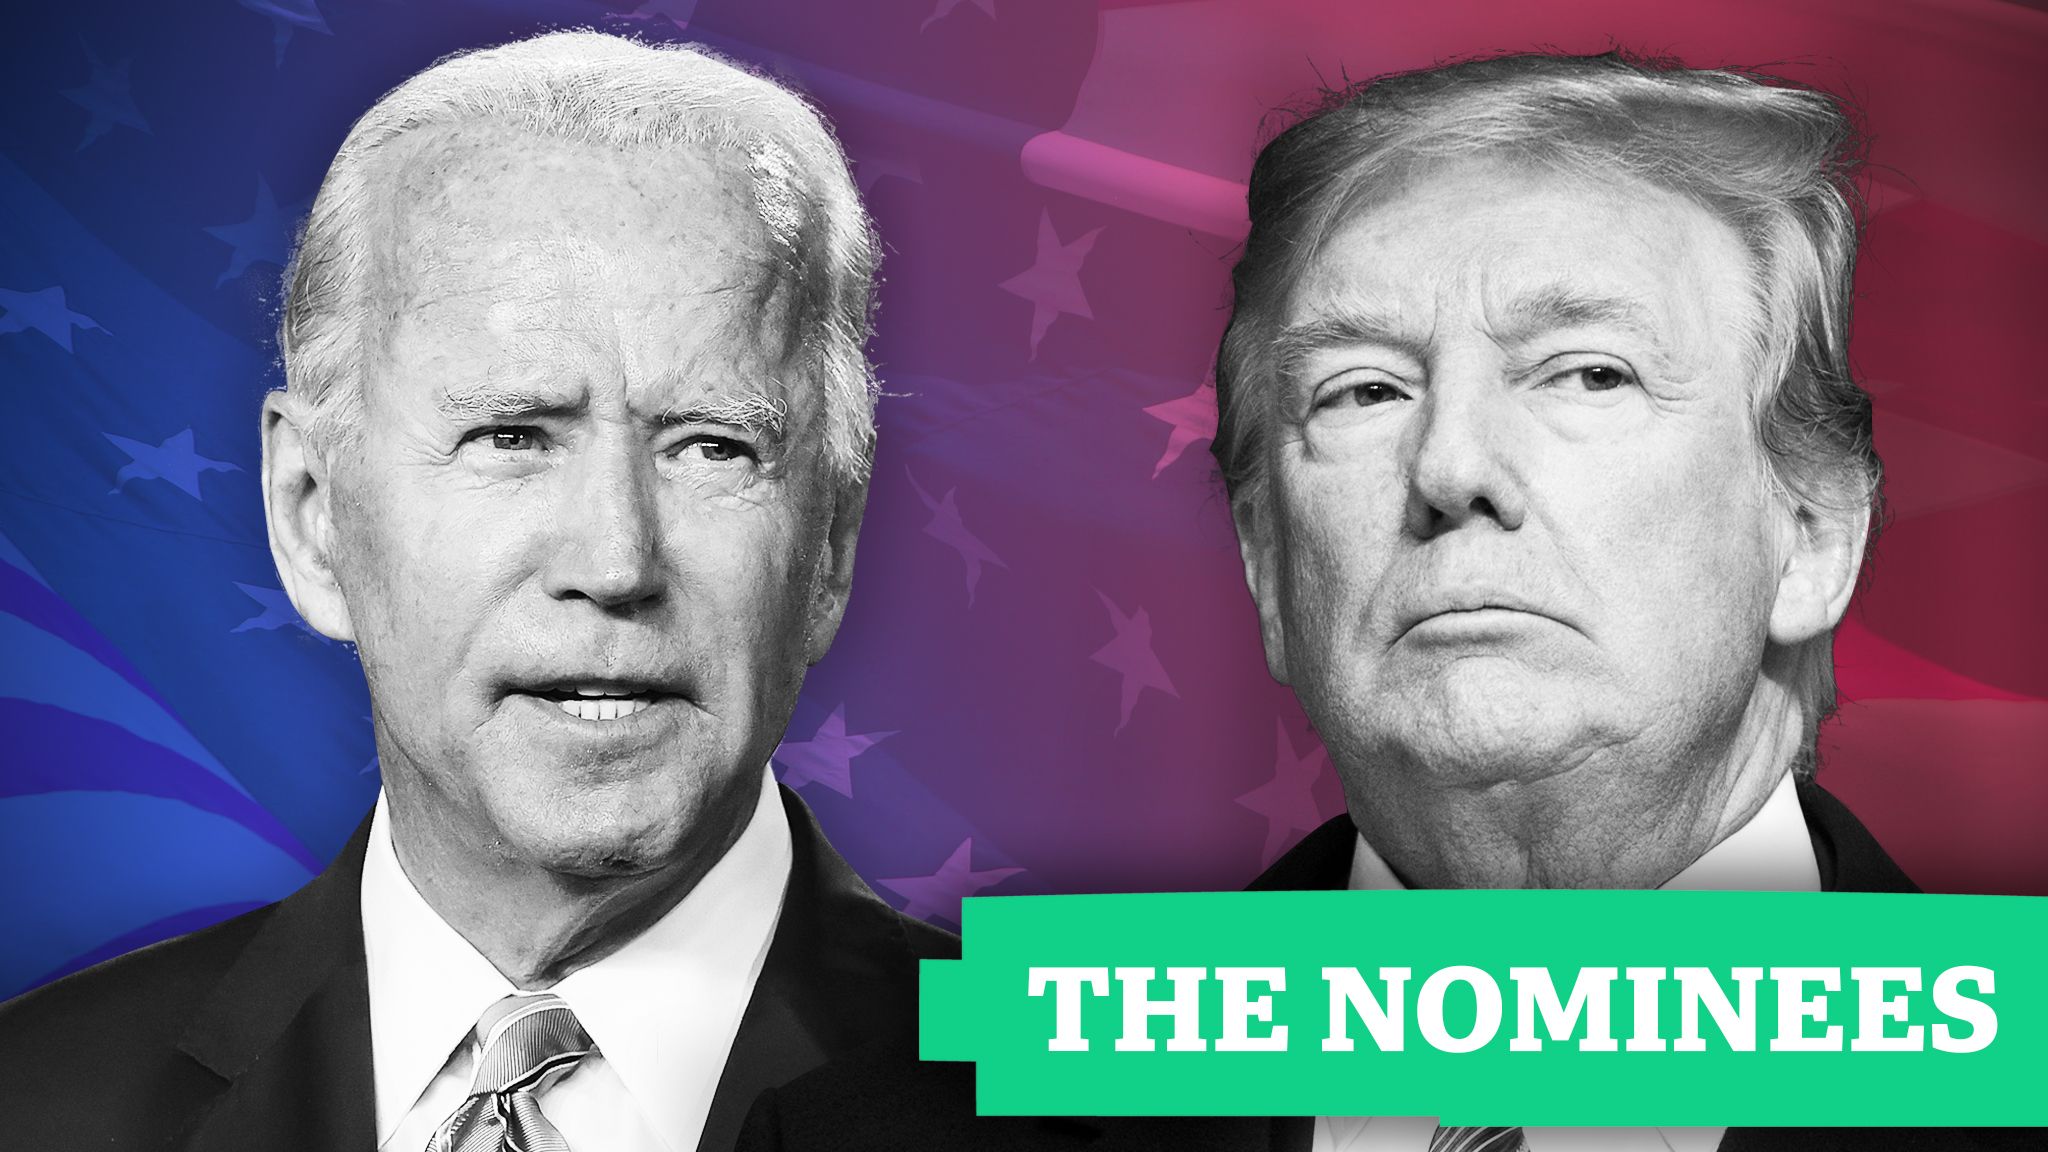 biden and trump with the text 'the nominees'